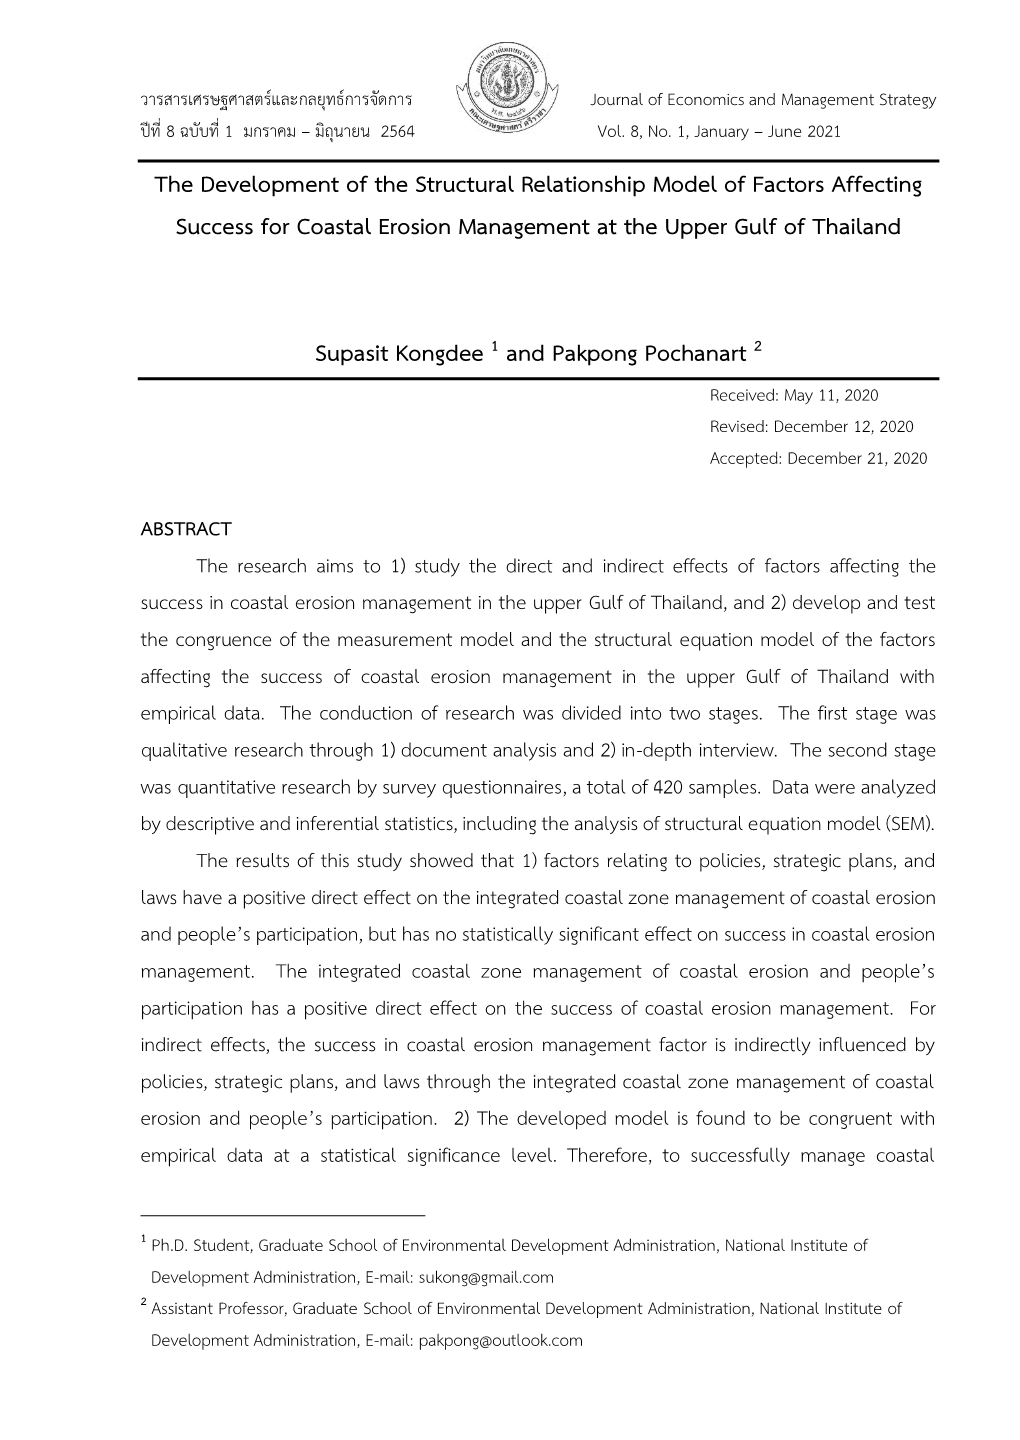 The Development of the Structural Relationship Model of Factors Affecting Success for Coastal Erosion Management at the Upper Gulf of Thailand